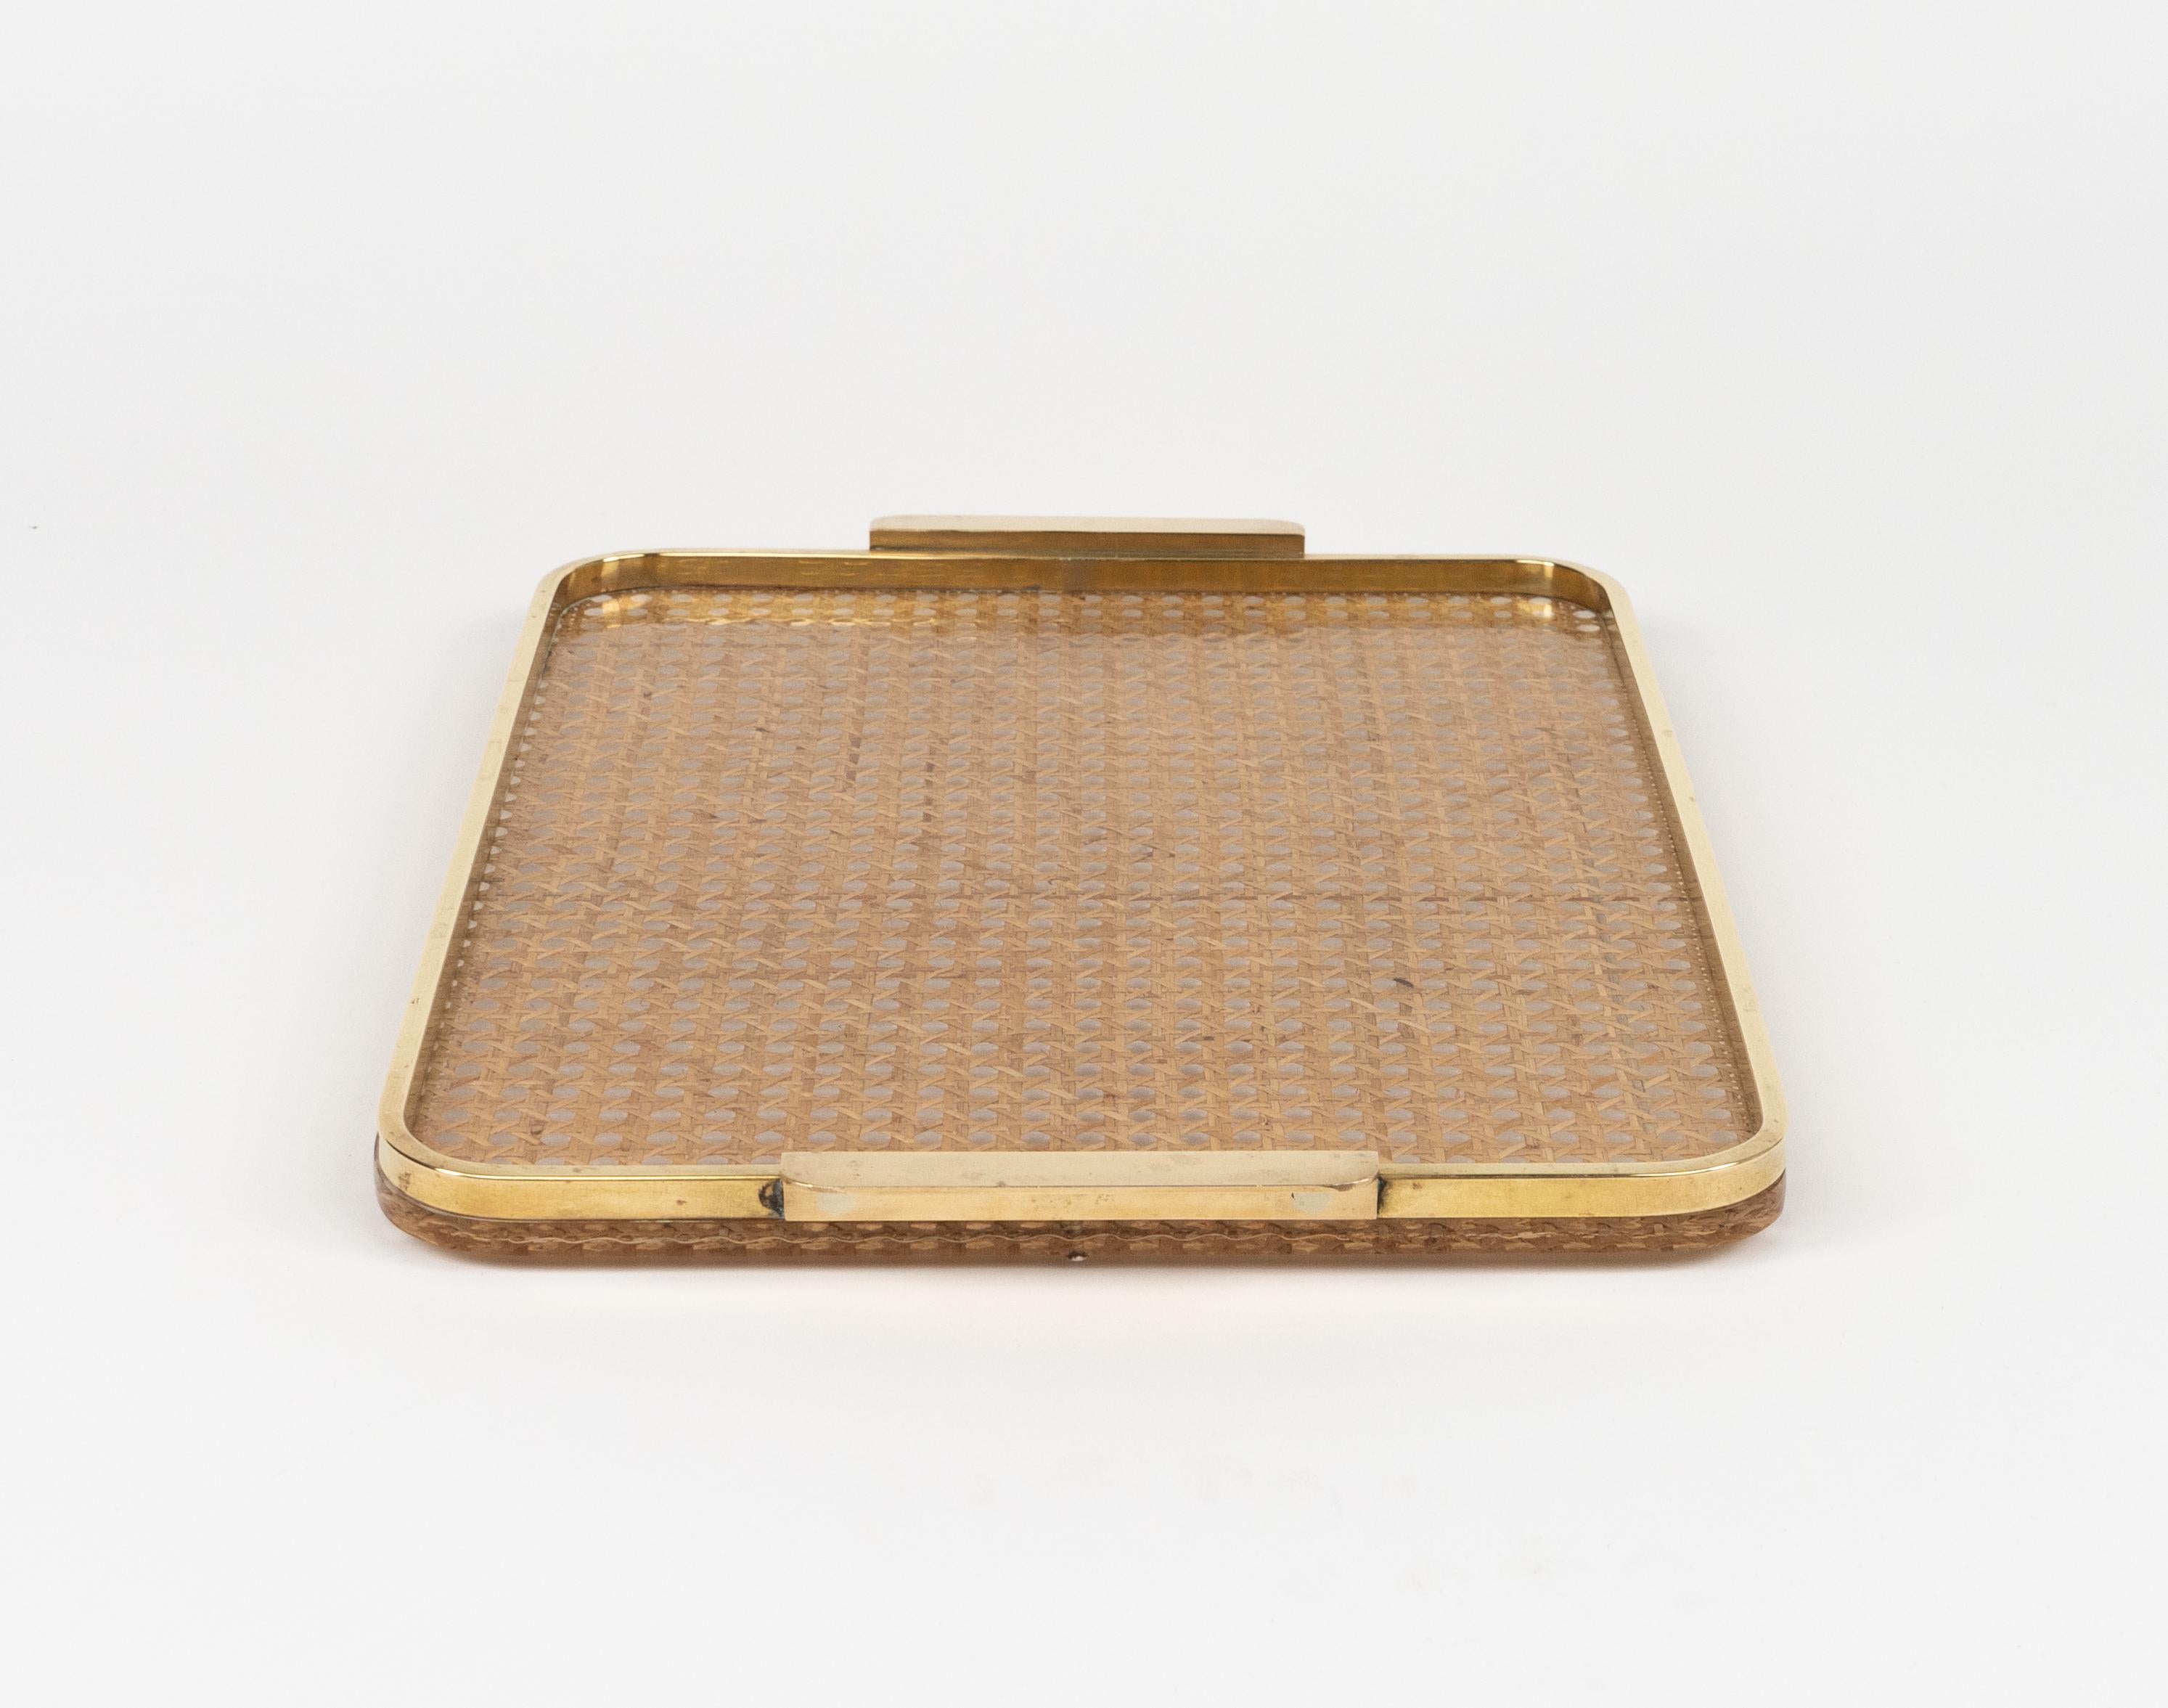 Serving Tray in Lucite, Rattan and Brass Christian Dior Style, Italy, 1970s For Sale 4